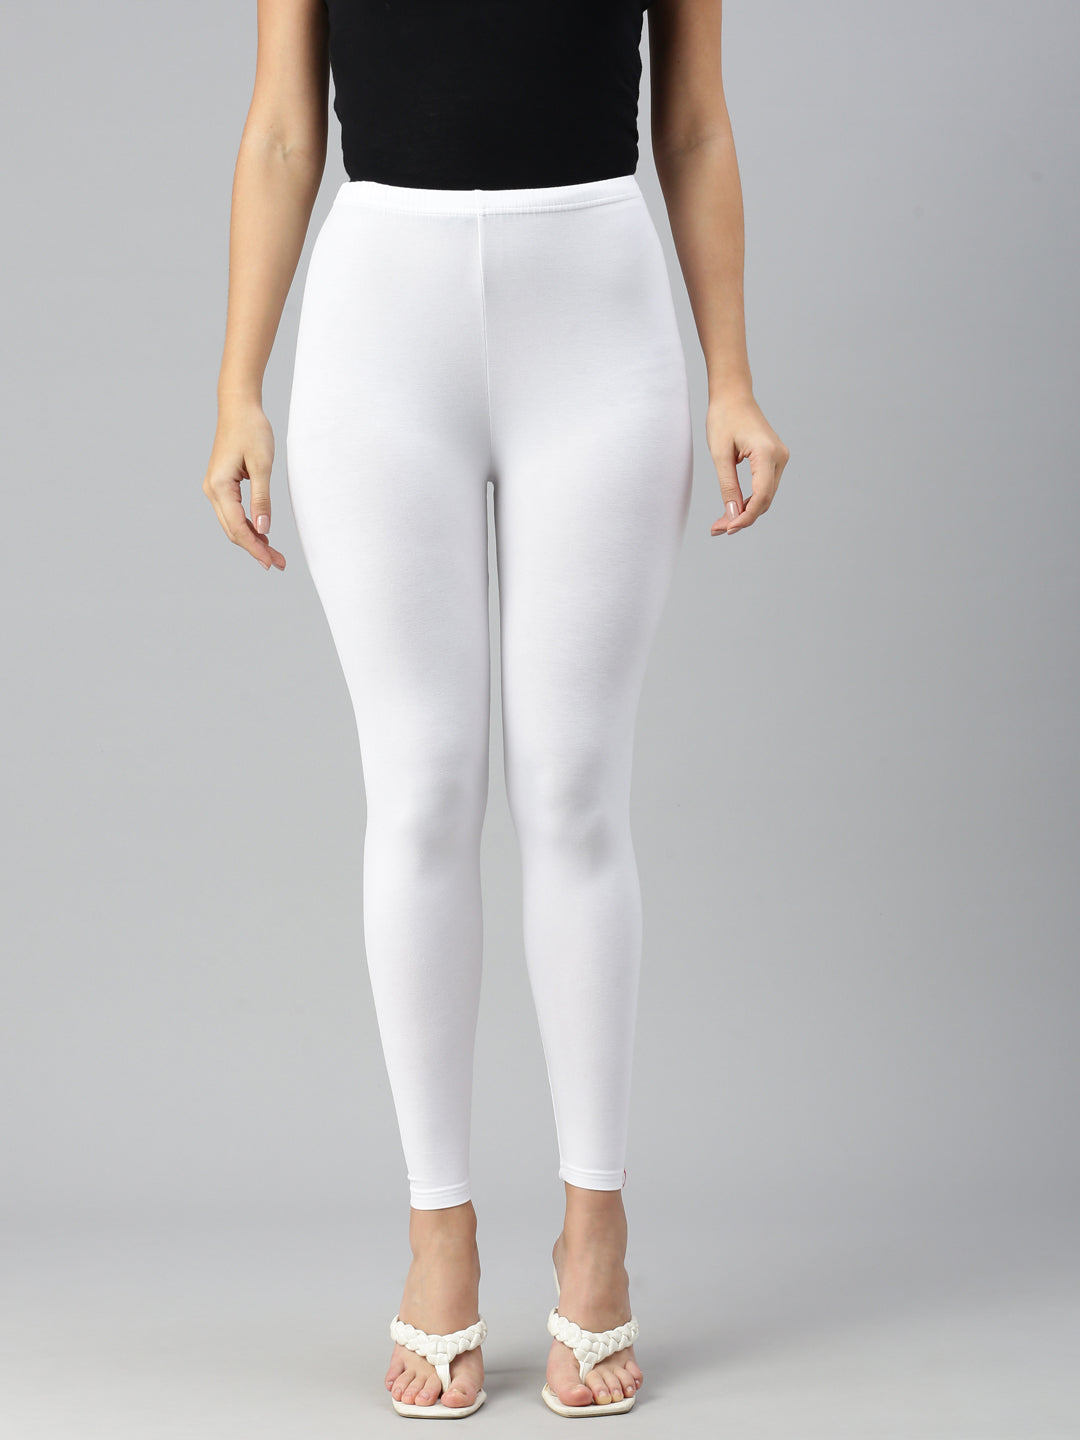 Buy W Solid Ankle Length Viscose Women's Legging | Shoppers Stop